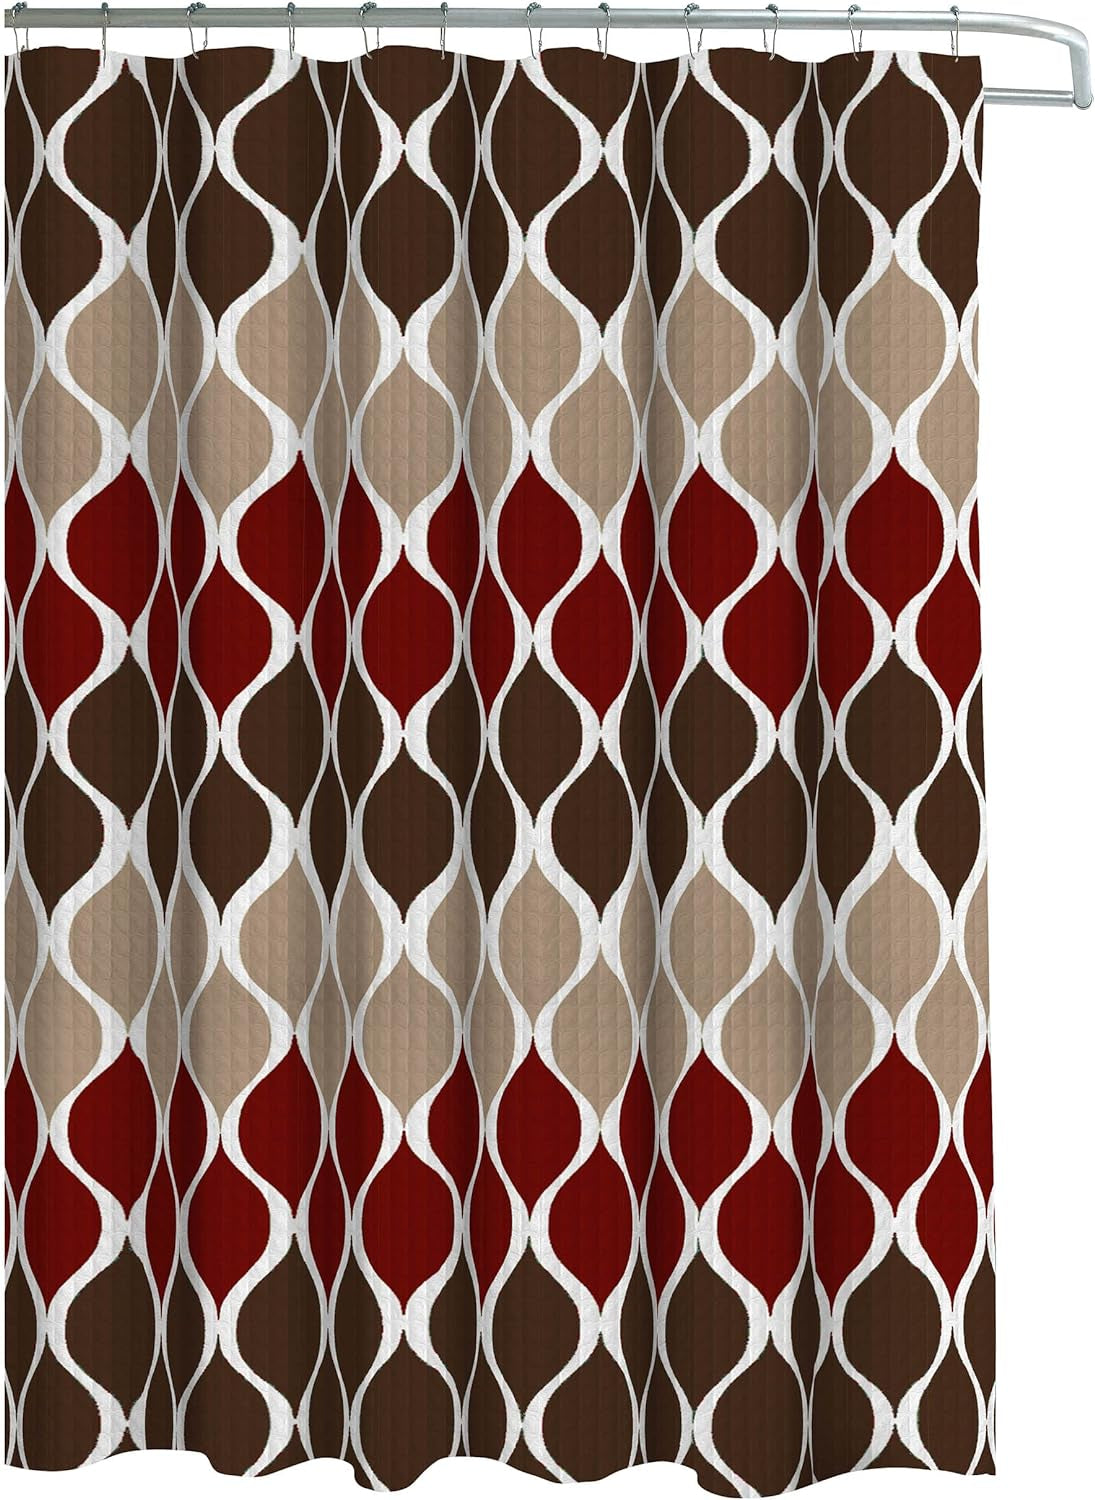 Creative Home Ideas – Textured Clarisse Shower Curtain Set | Set of 1 Shower Curtain & 12 Metal Hooks | Rust Resistant | 100% Polyester | Machine Washable | Measures 70” X 72” | Espresso